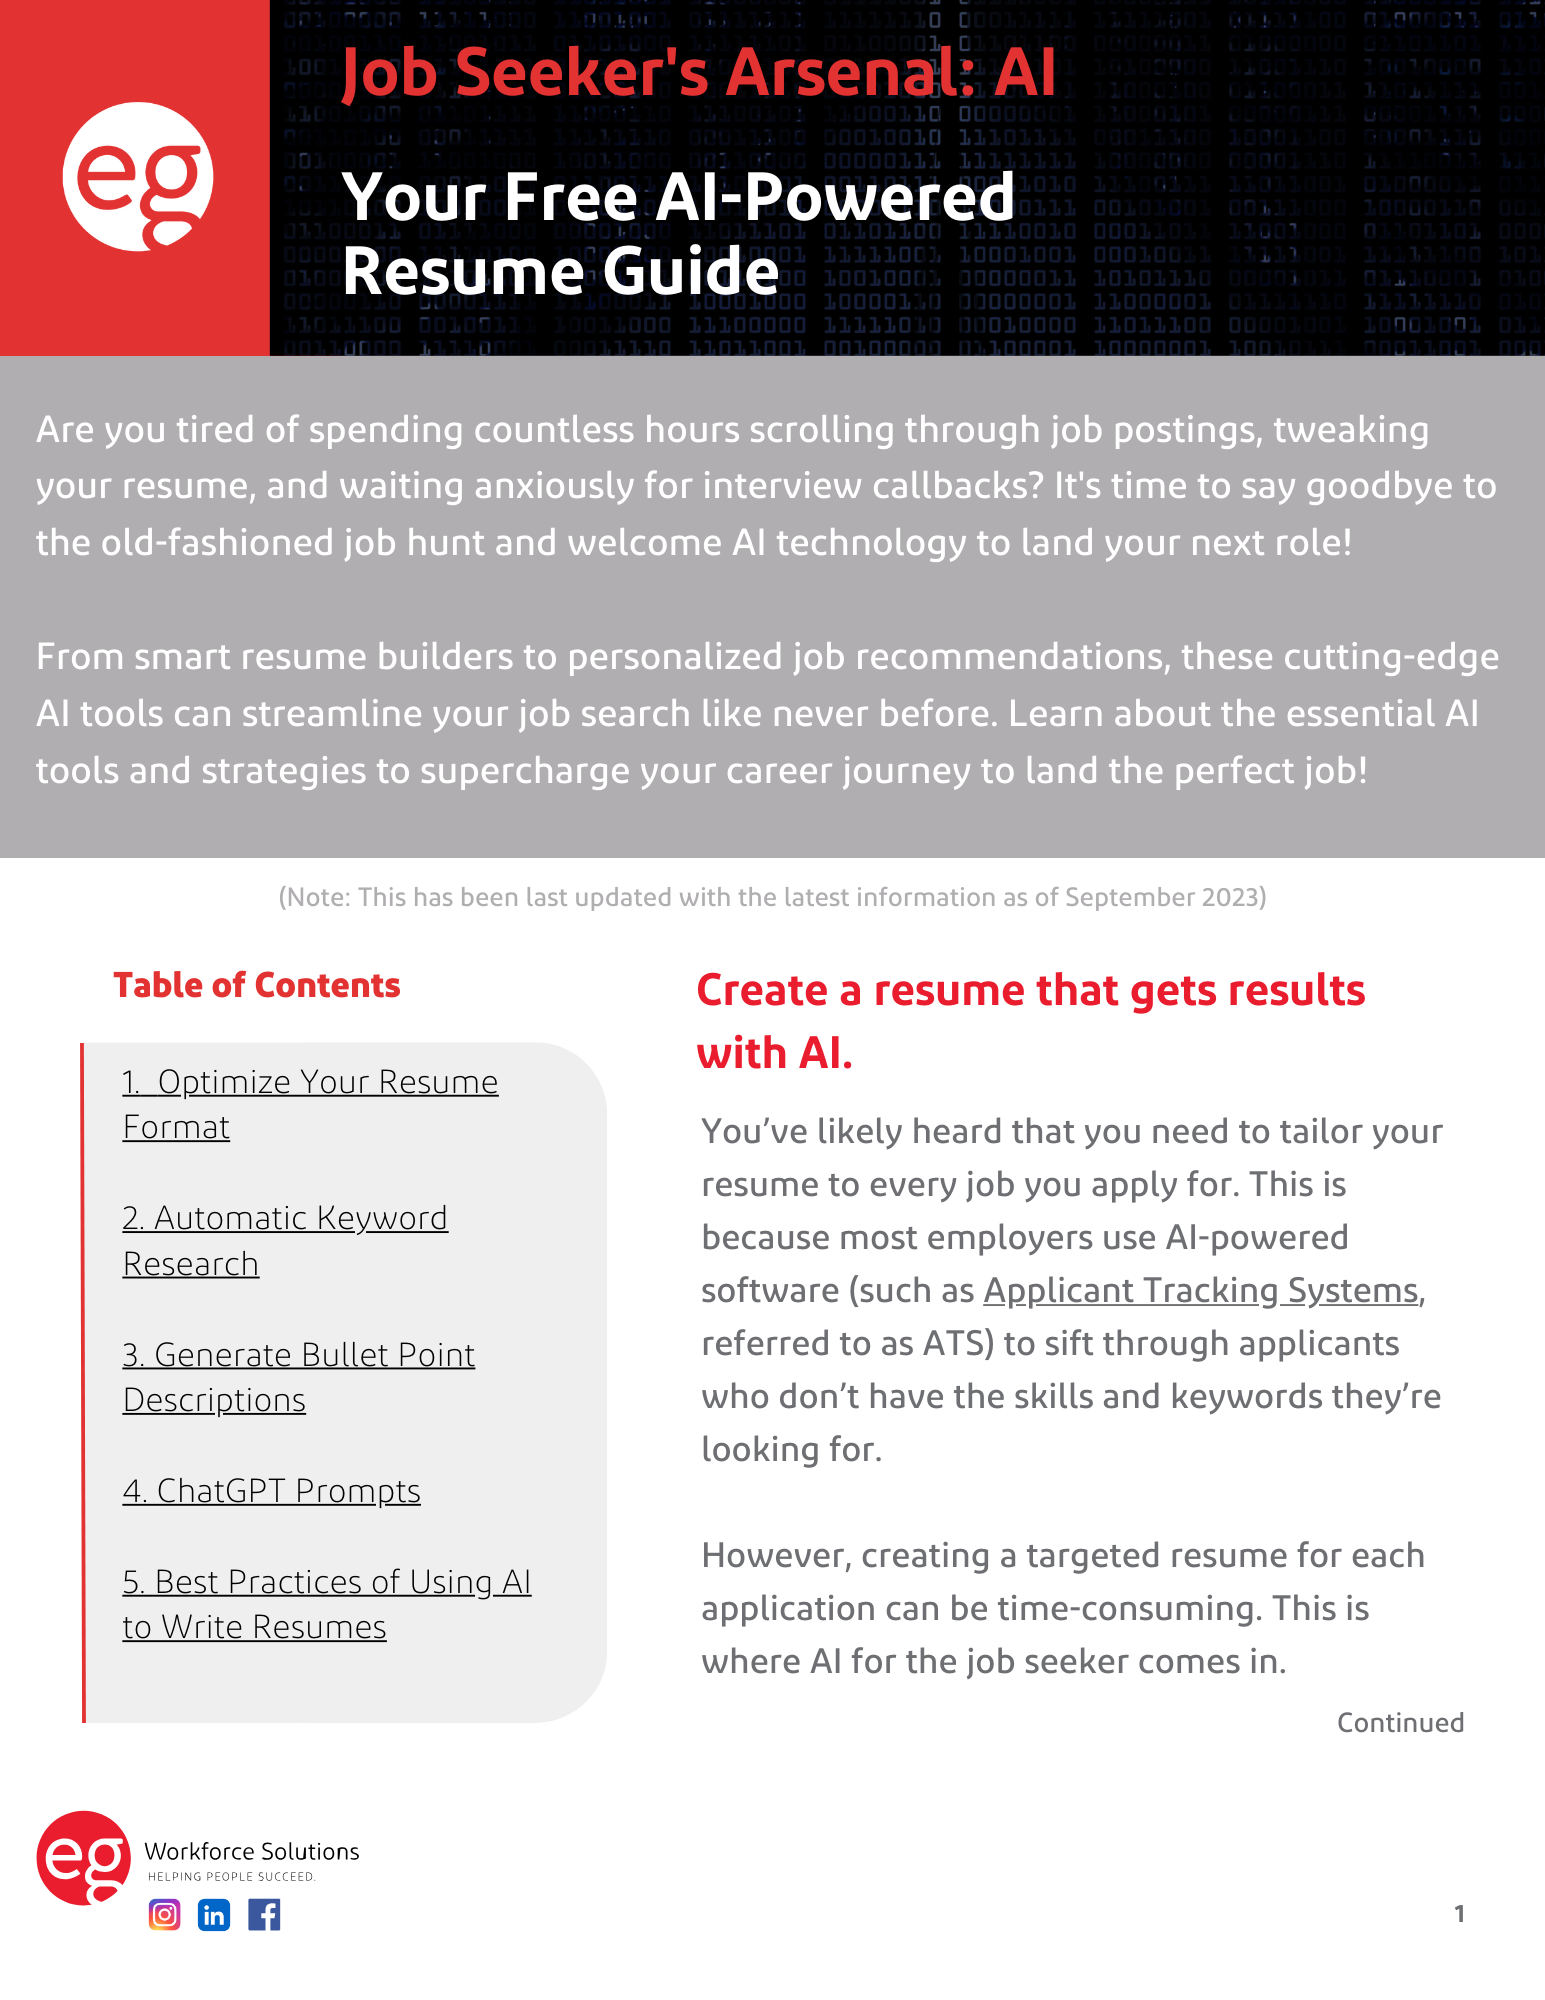 Your AI-Powered Resume Guide